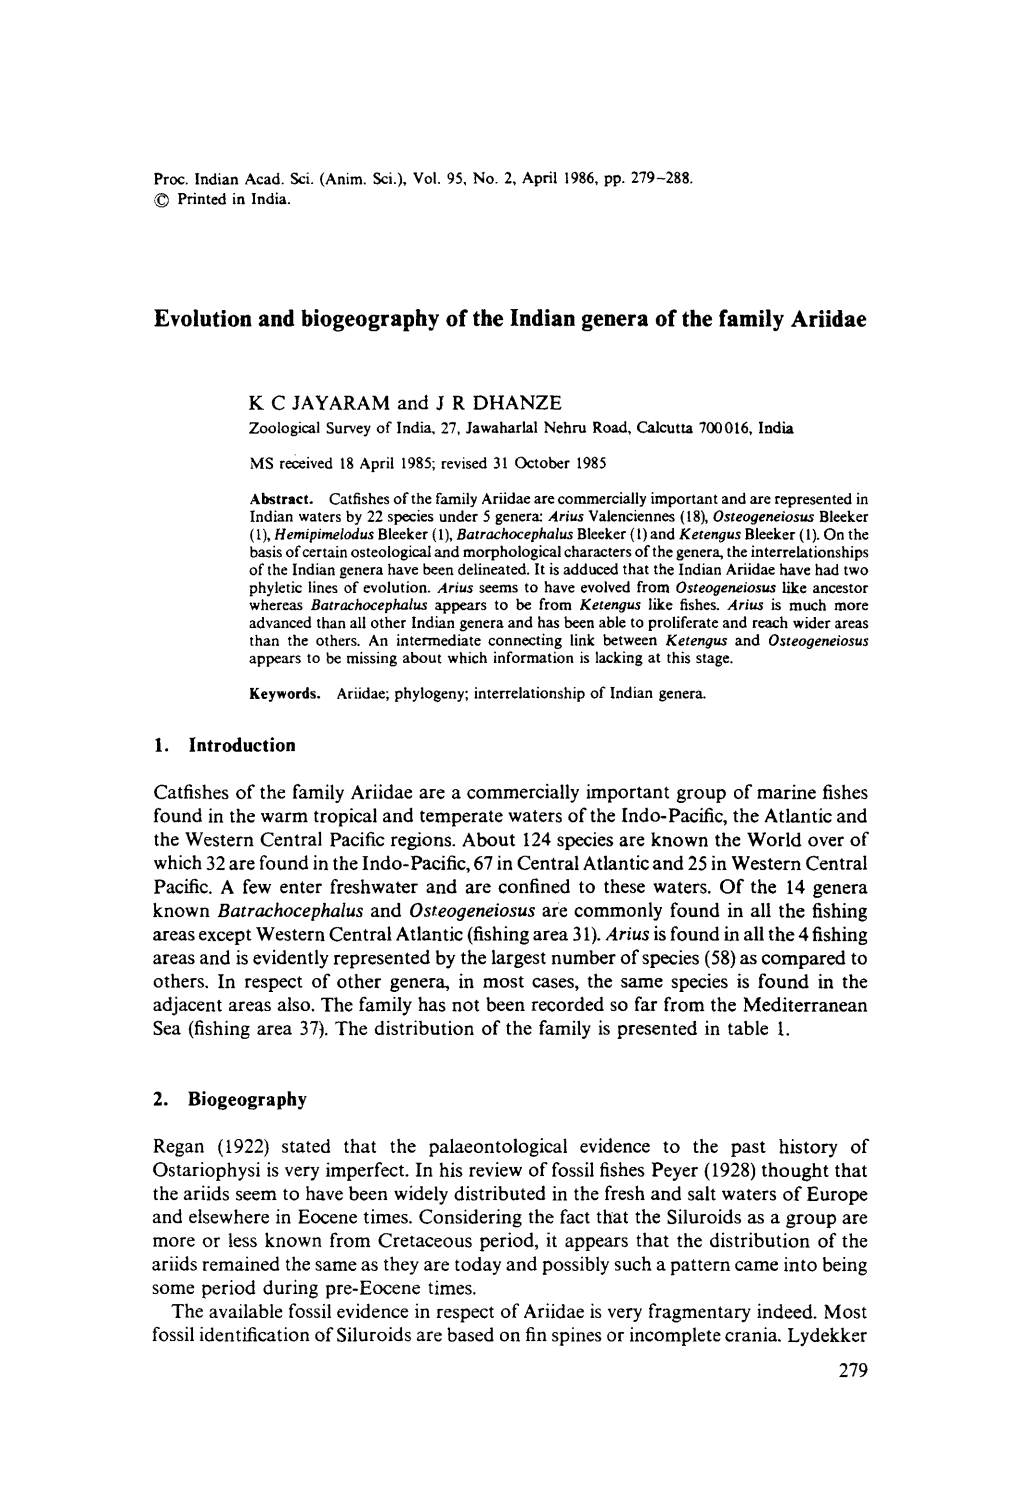 Evolution and Biogeography of the Indian Genera of the Family Ariidae